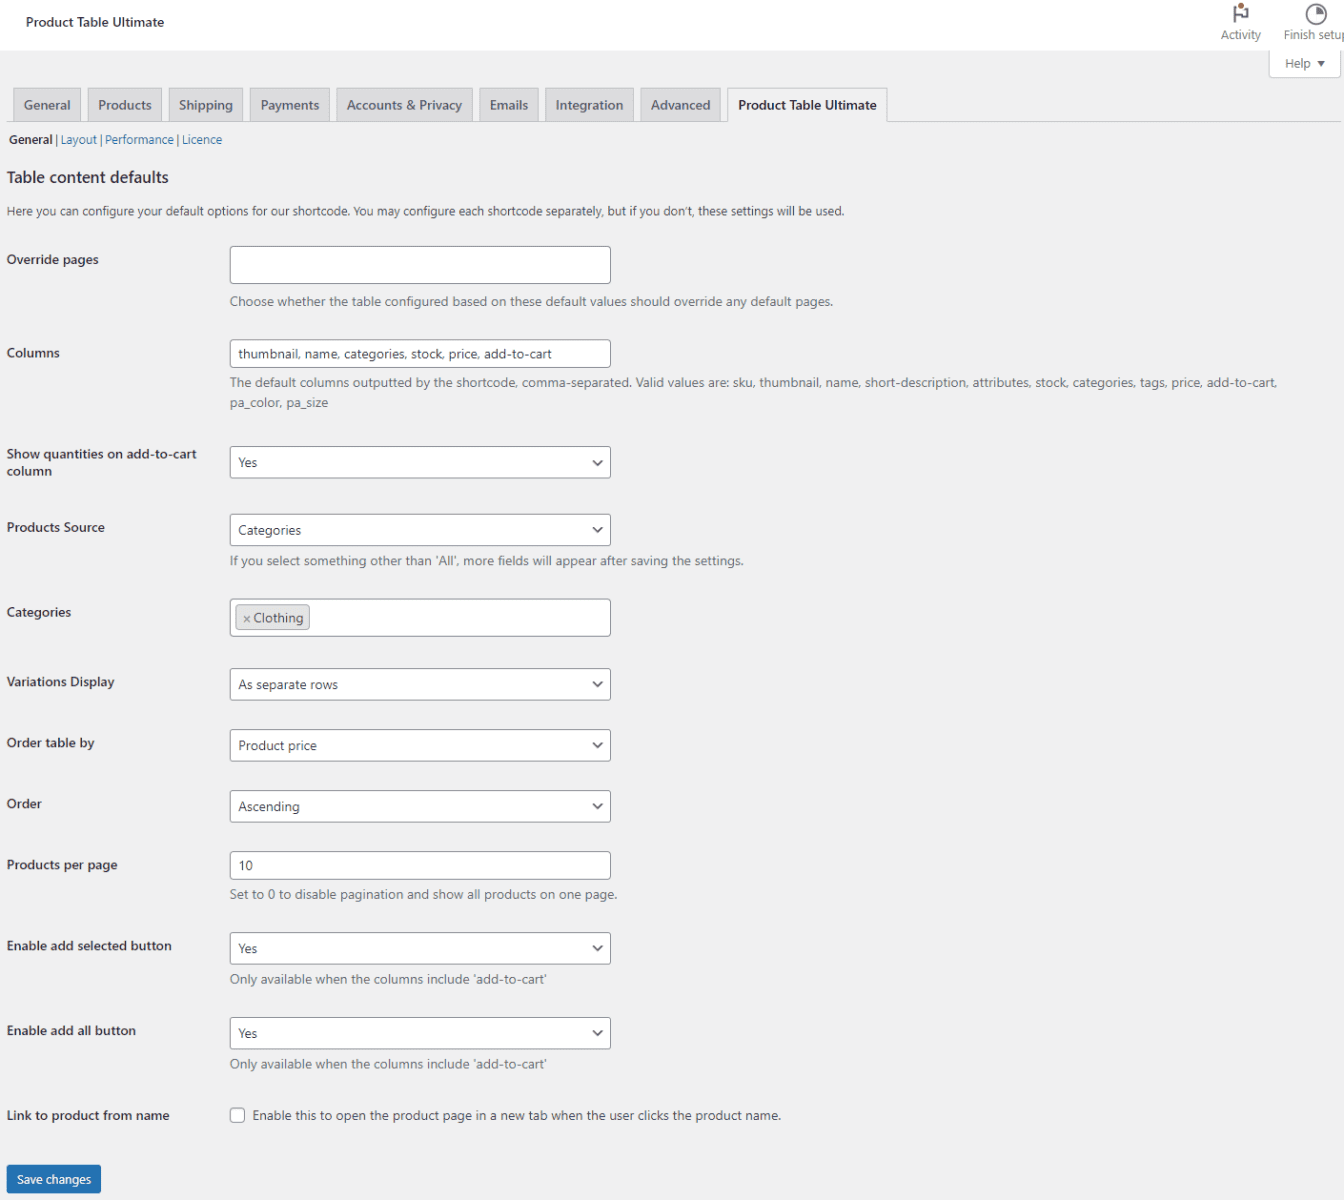 WooCommerce Product Table Ultimate settings